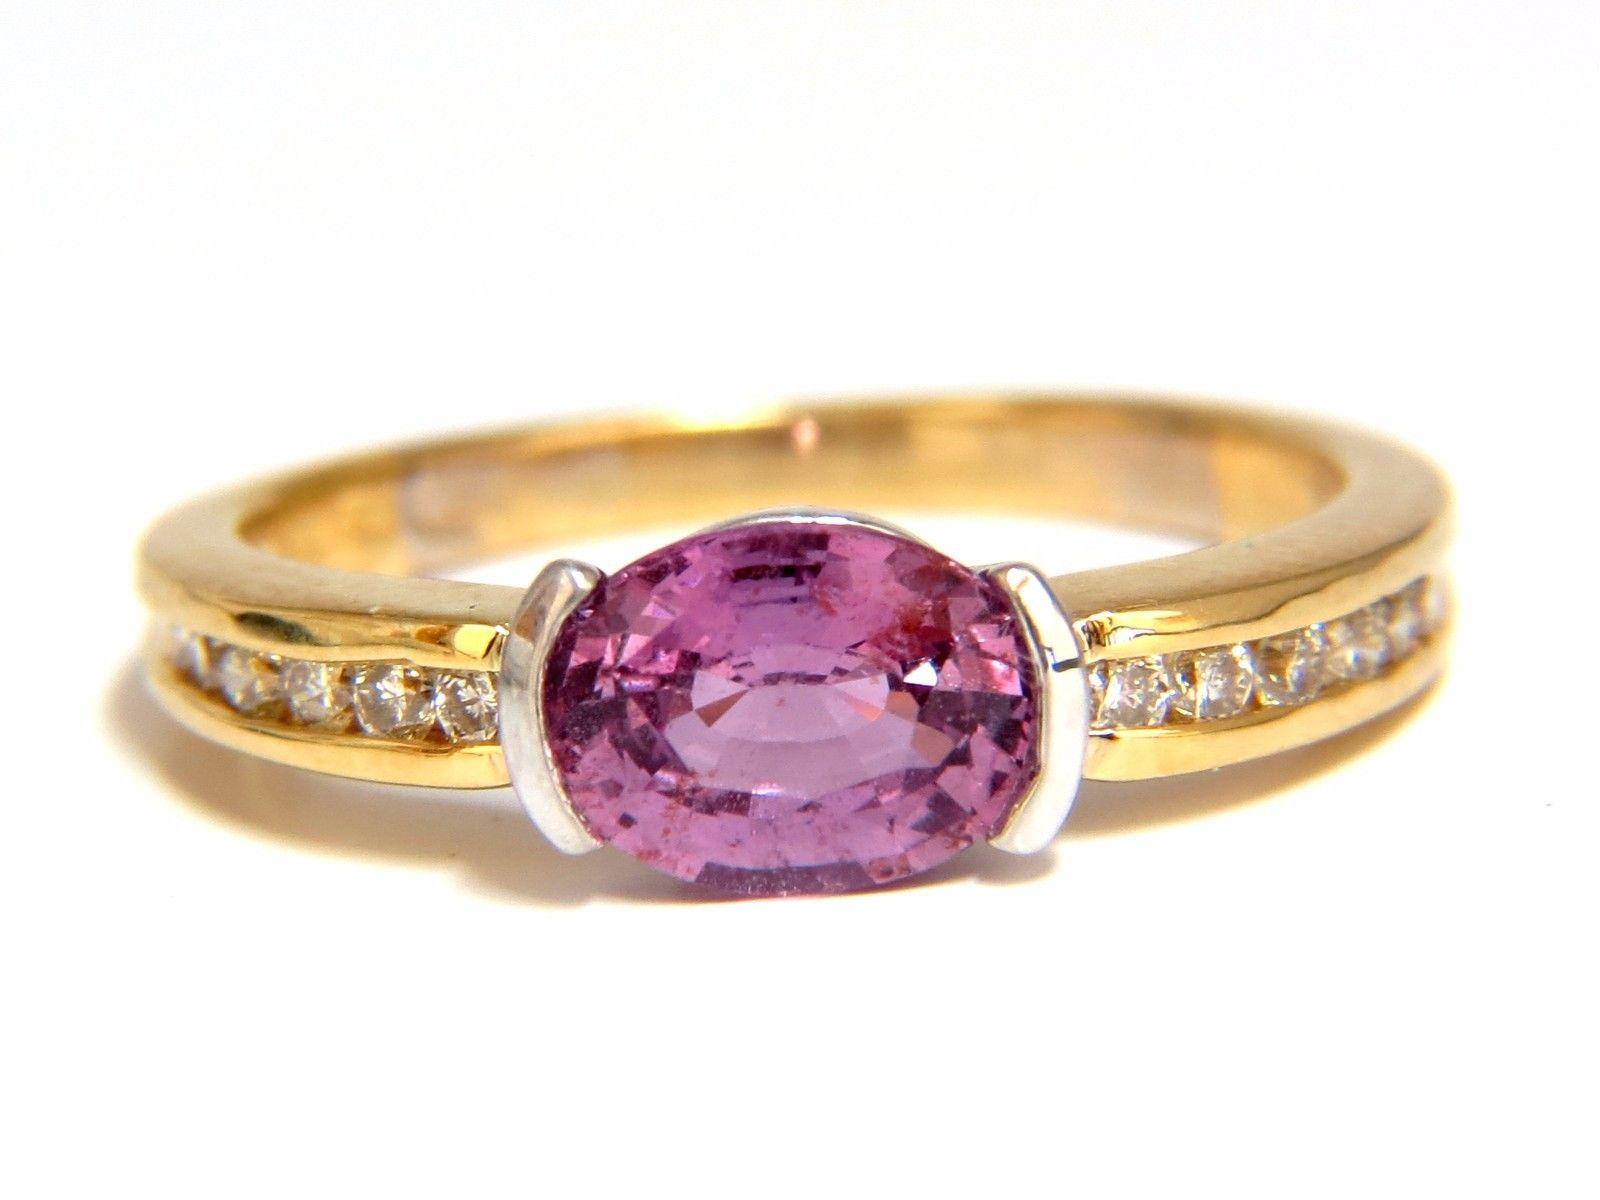 No Heat Pink & Channel

1.58ct. Natural GIA Certified No Heat Pink Sapphire Ring

GIA Certified Report ID: 2155170522

8.12 X 6.19 X 3.82mm

Full cut oval brilliant 

Clean Clarity & Transparent



.20ct. Diamonds.

Round & full cuts 

H-color Vs-2